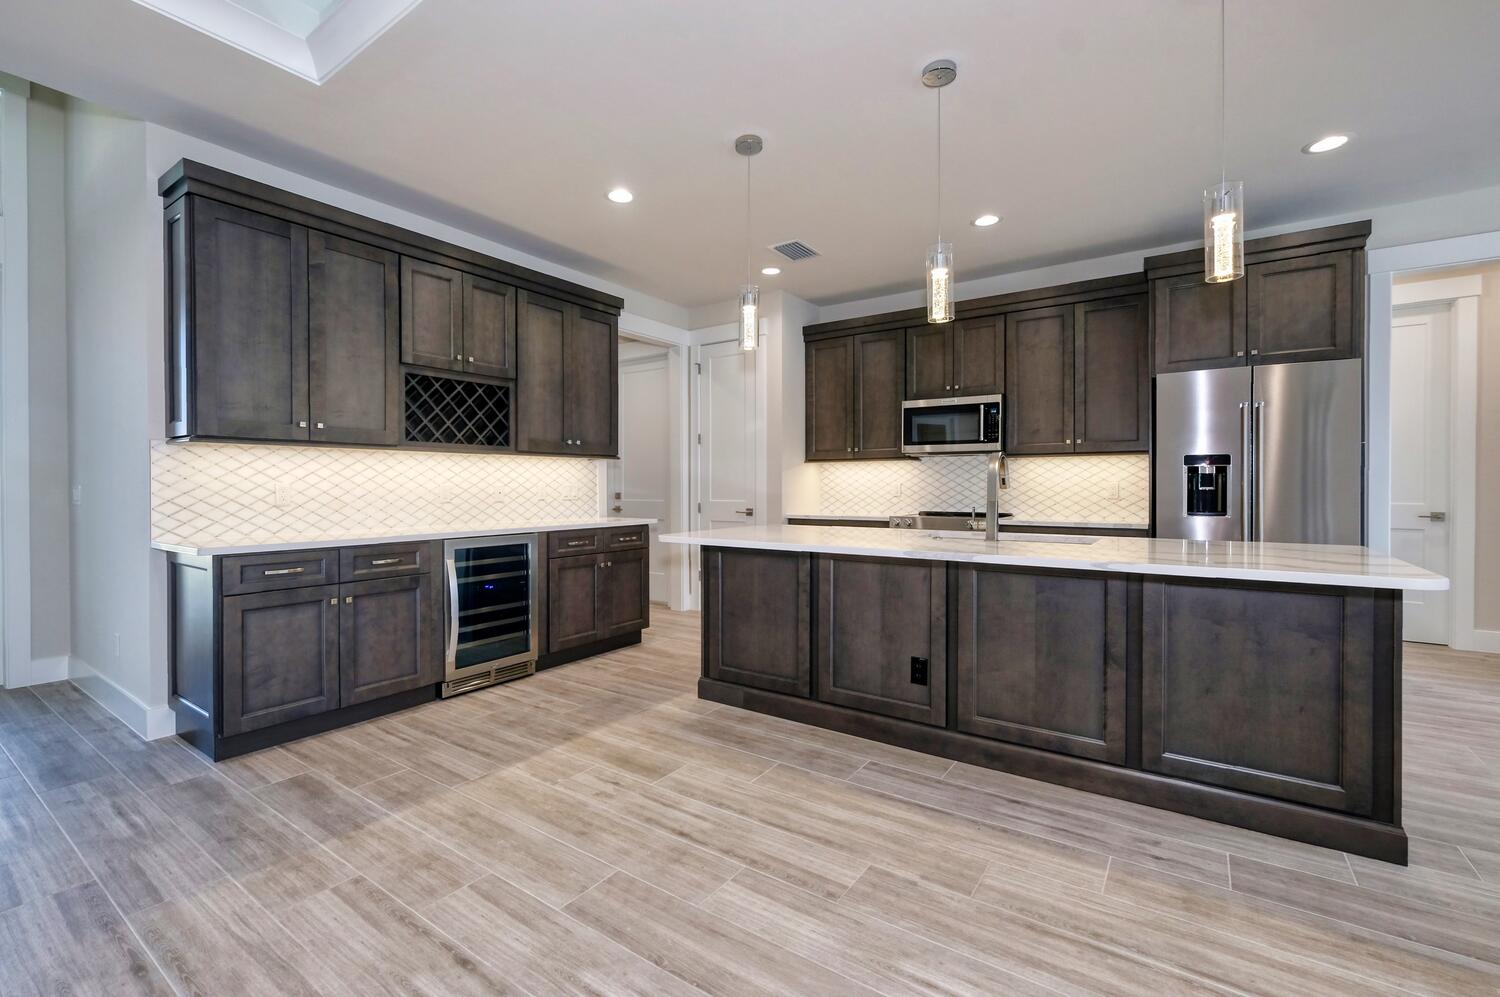 Picture of the kitchen of the model home Serenity